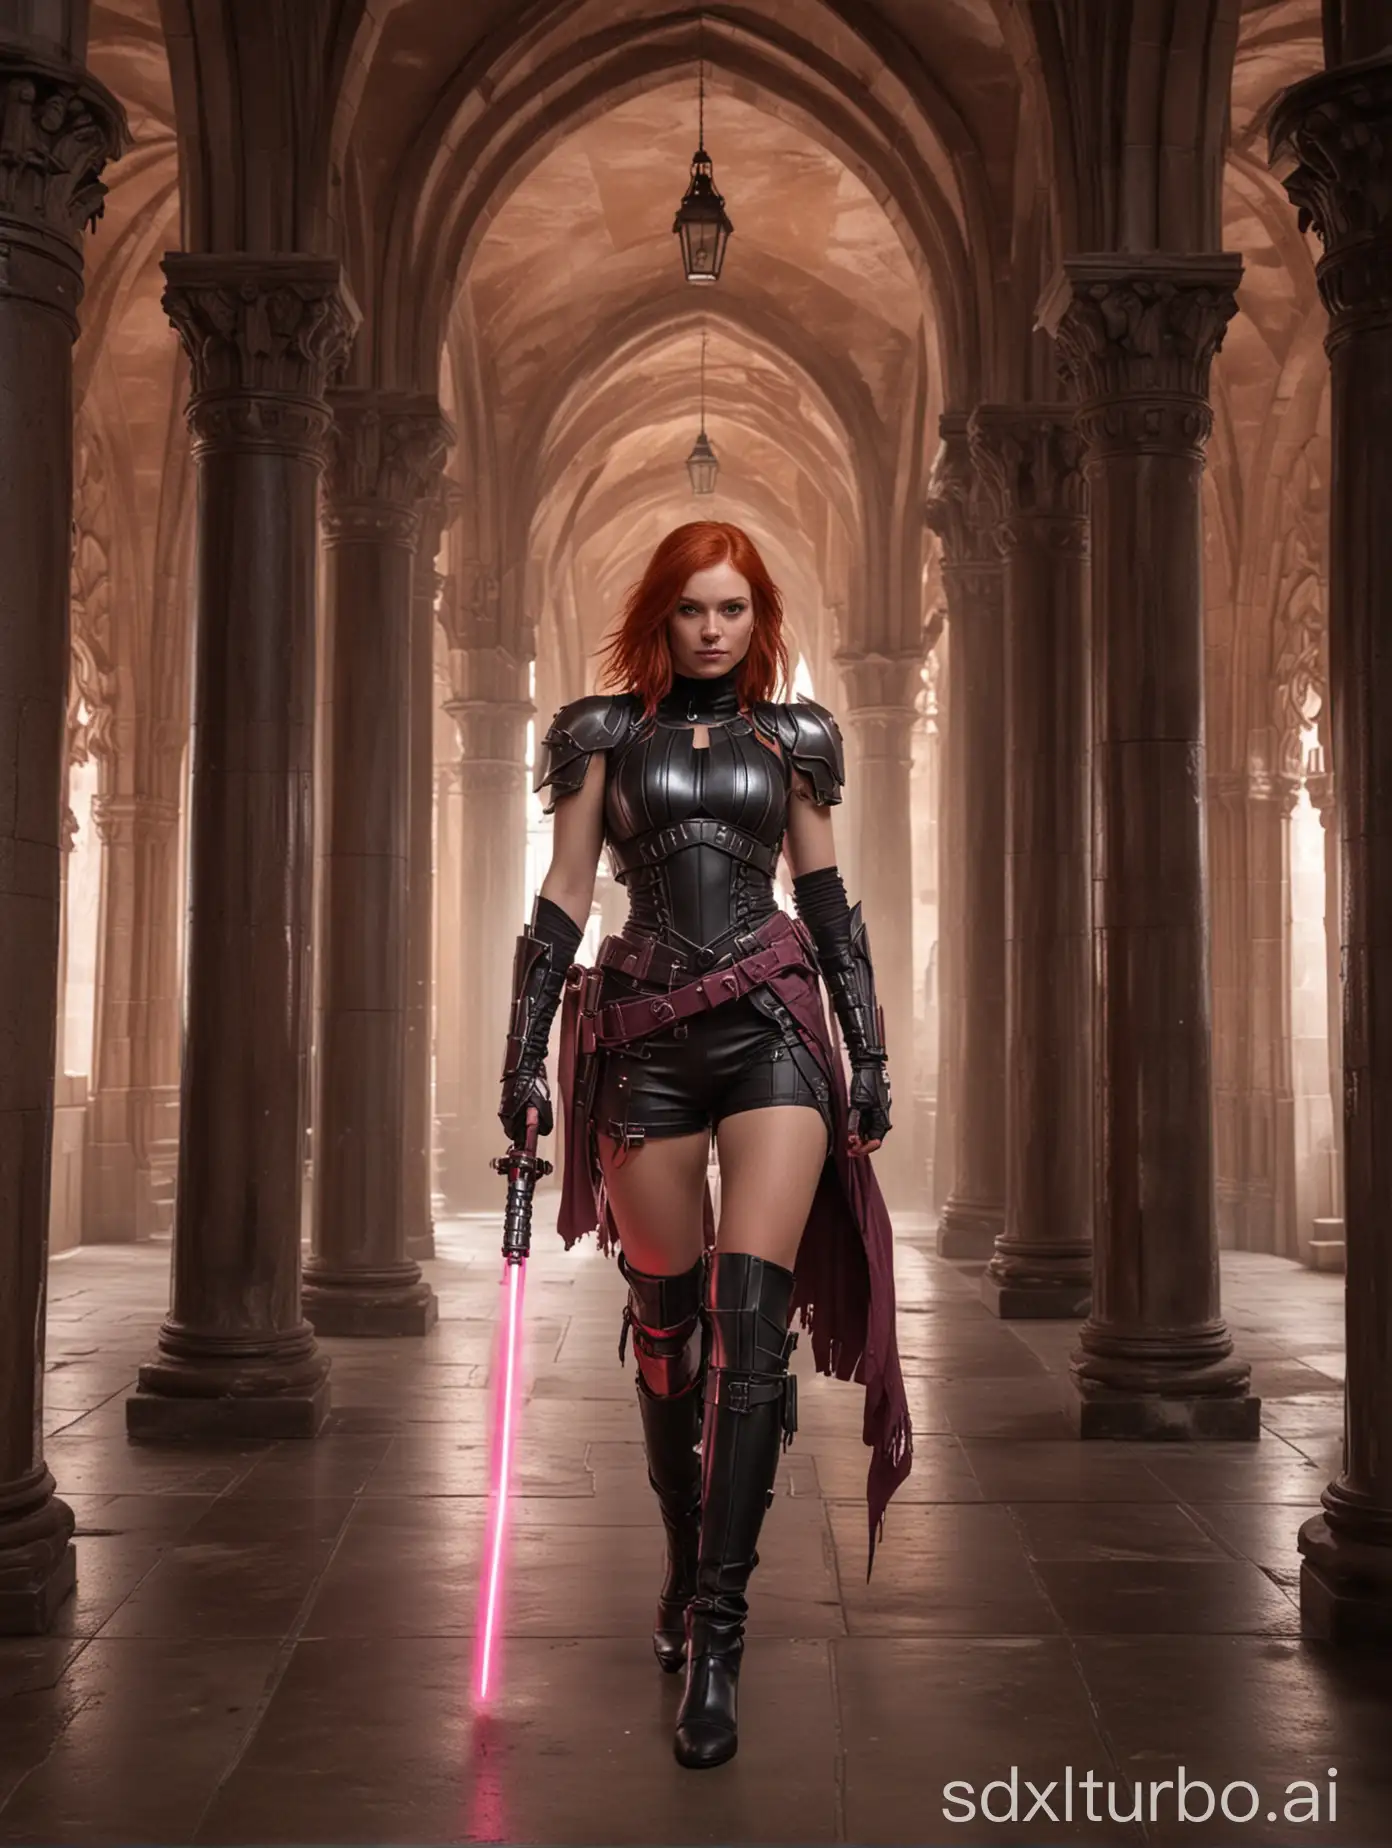 A red-haired woman in leather armor holds a pink lightsaber. She stands in a gothic hallway with arches and pillars.